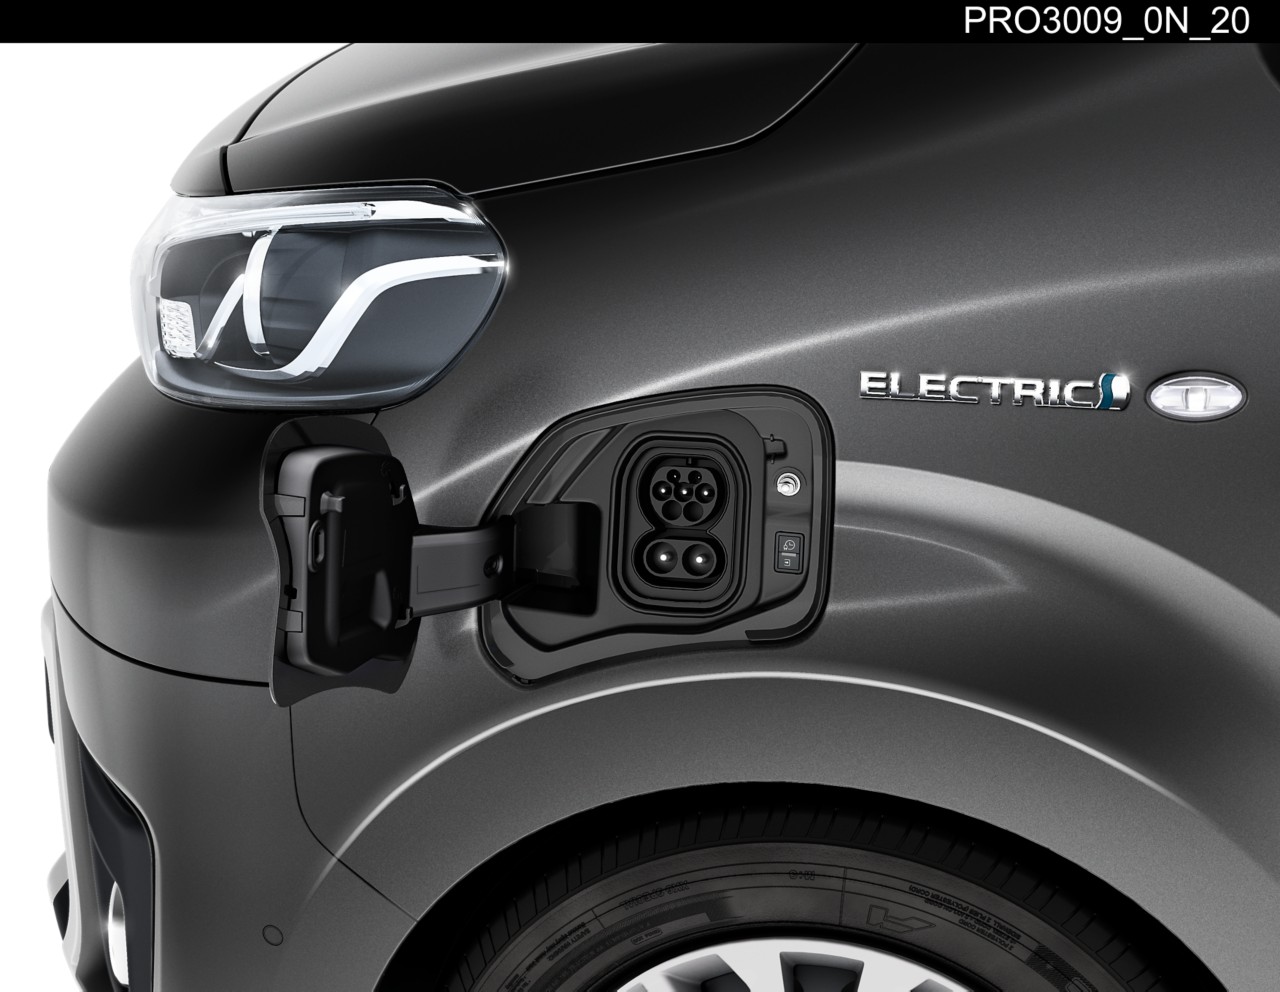 Electric vehicle’s charging port